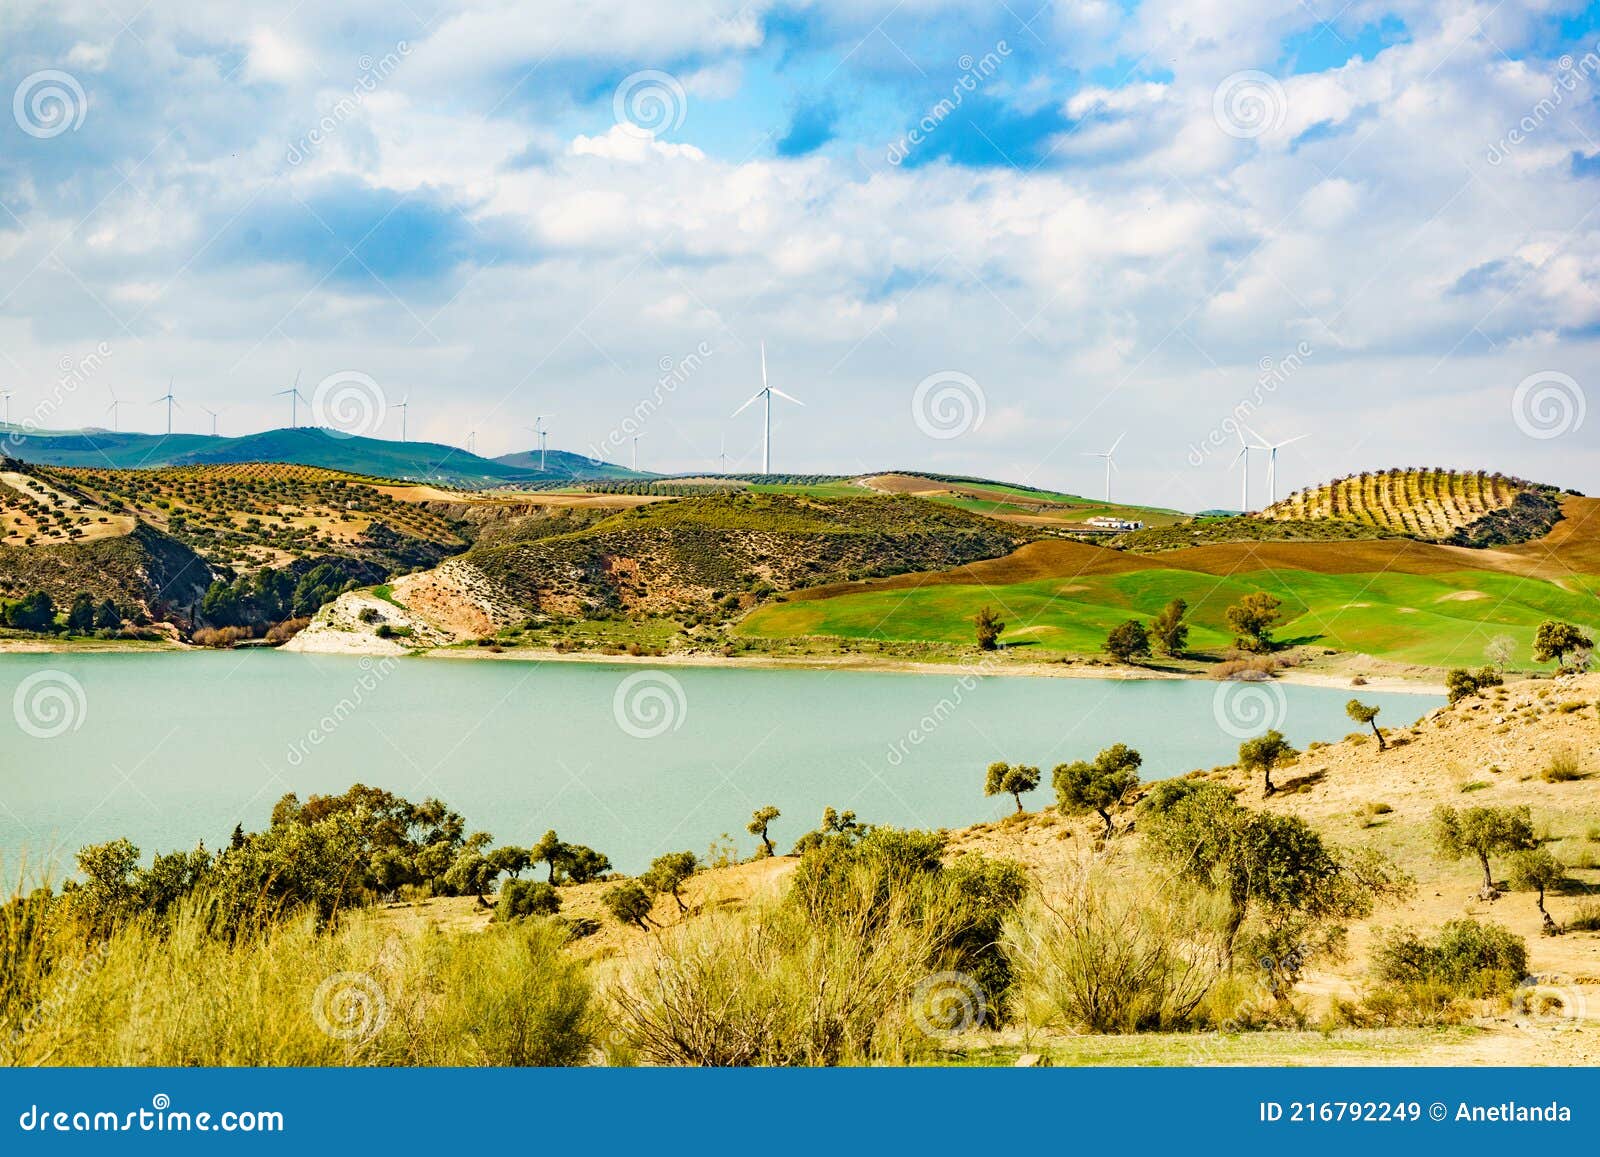 7 725 Spanish Hills Photos Free Royalty Free Stock Photos From Dreamstime